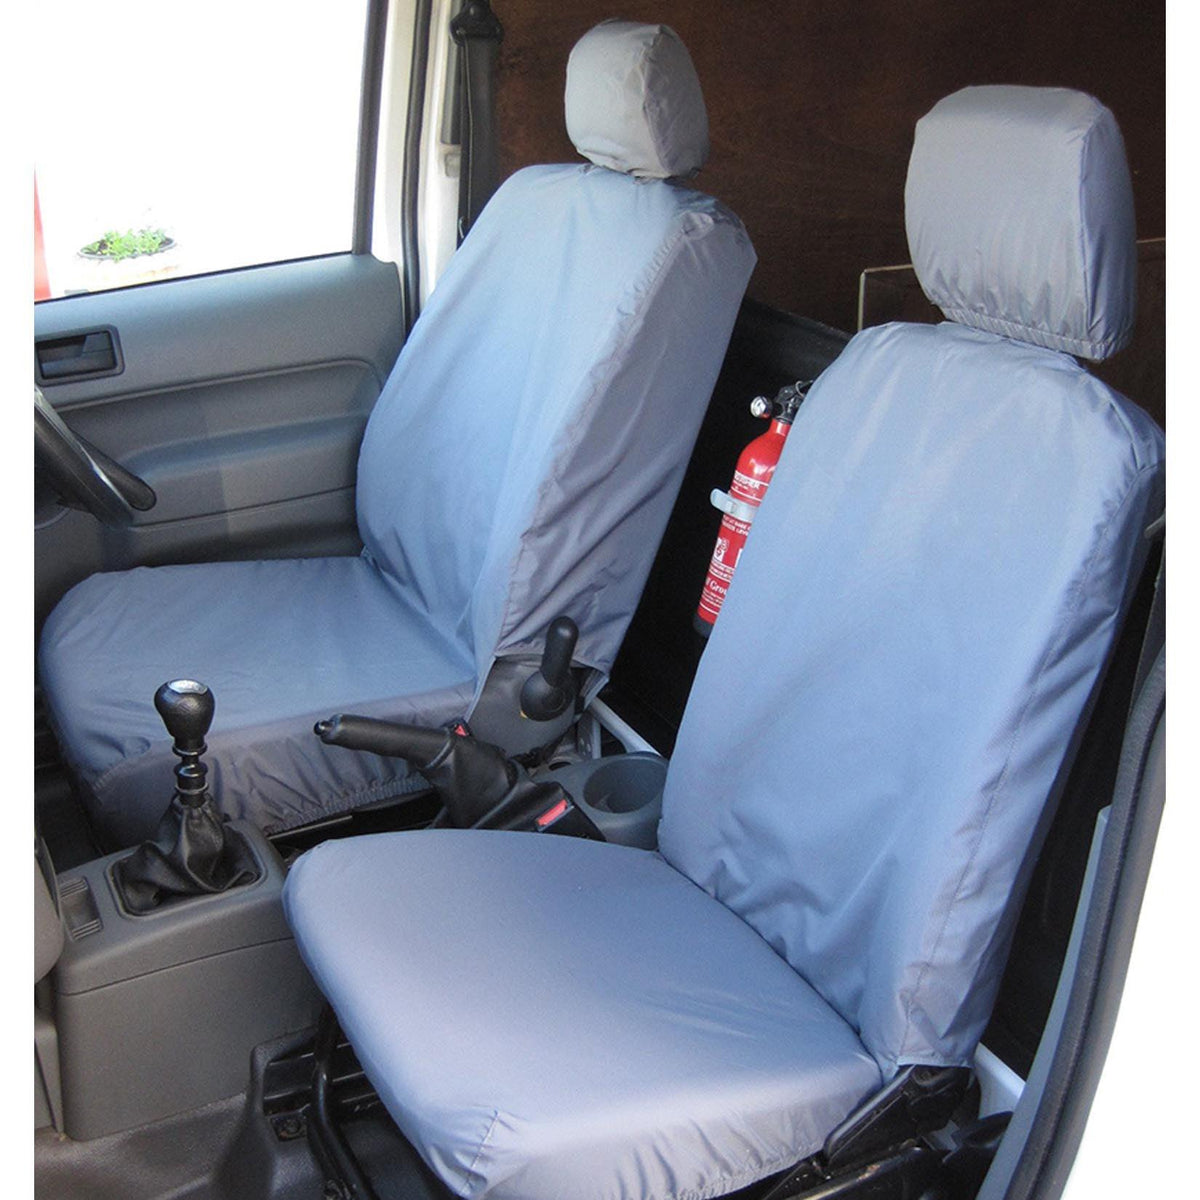 FORD TRANSIT CONNECT 2002-2014 DRIVER SEAT (NO ARMREST) AND PASSENGER SEAT COVERS - PAIR - GREY - Storm Xccessories2